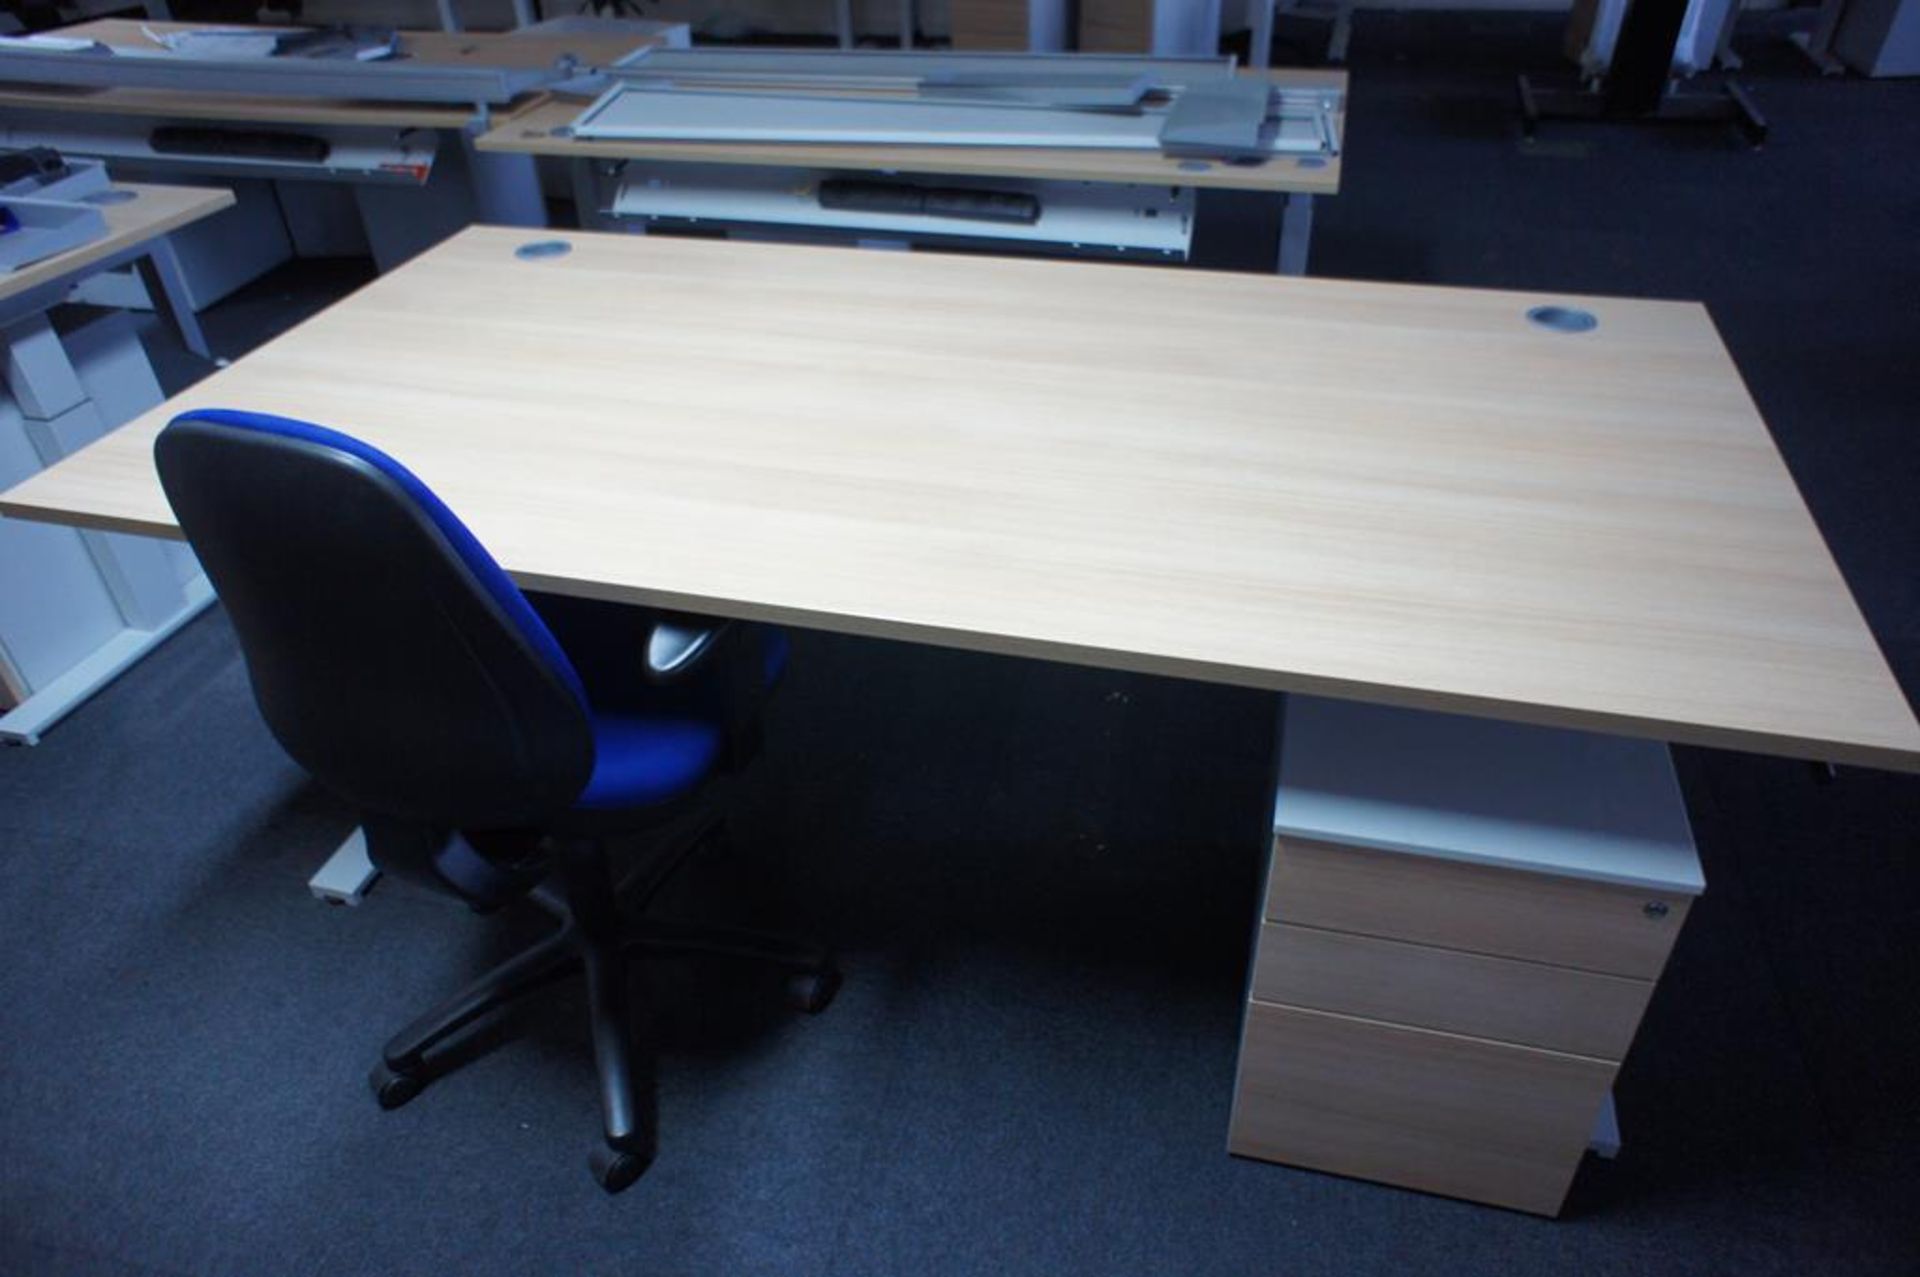 * Oak Effect Compiler Desk 2000 x 1000 with Rise & Fall adjustment with matching pedestal & - Image 3 of 3